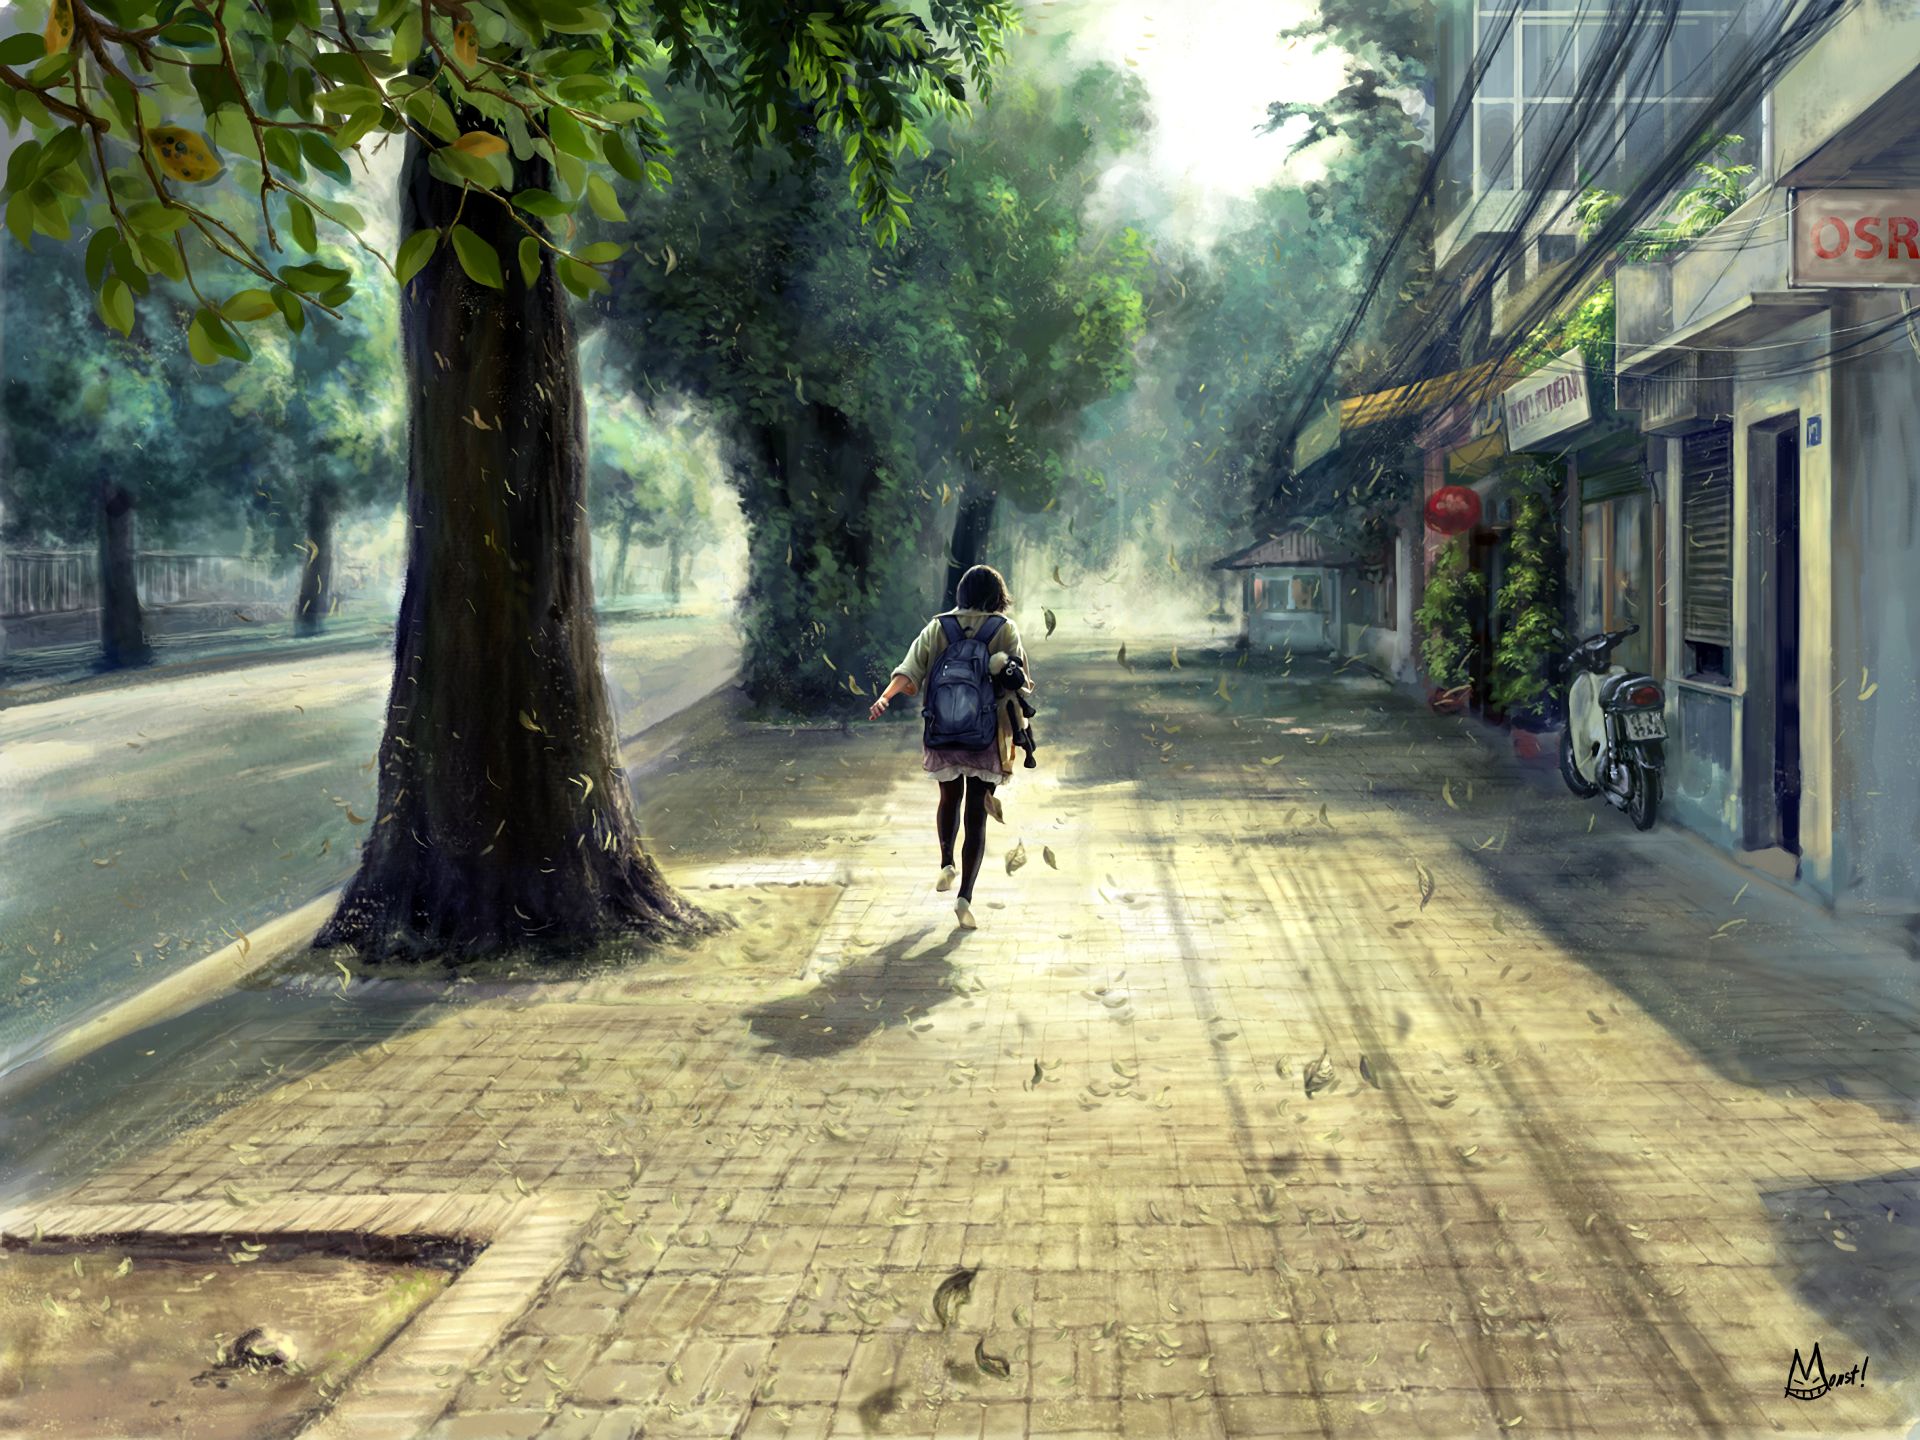 android anime, tree, running, street, backpack, wind